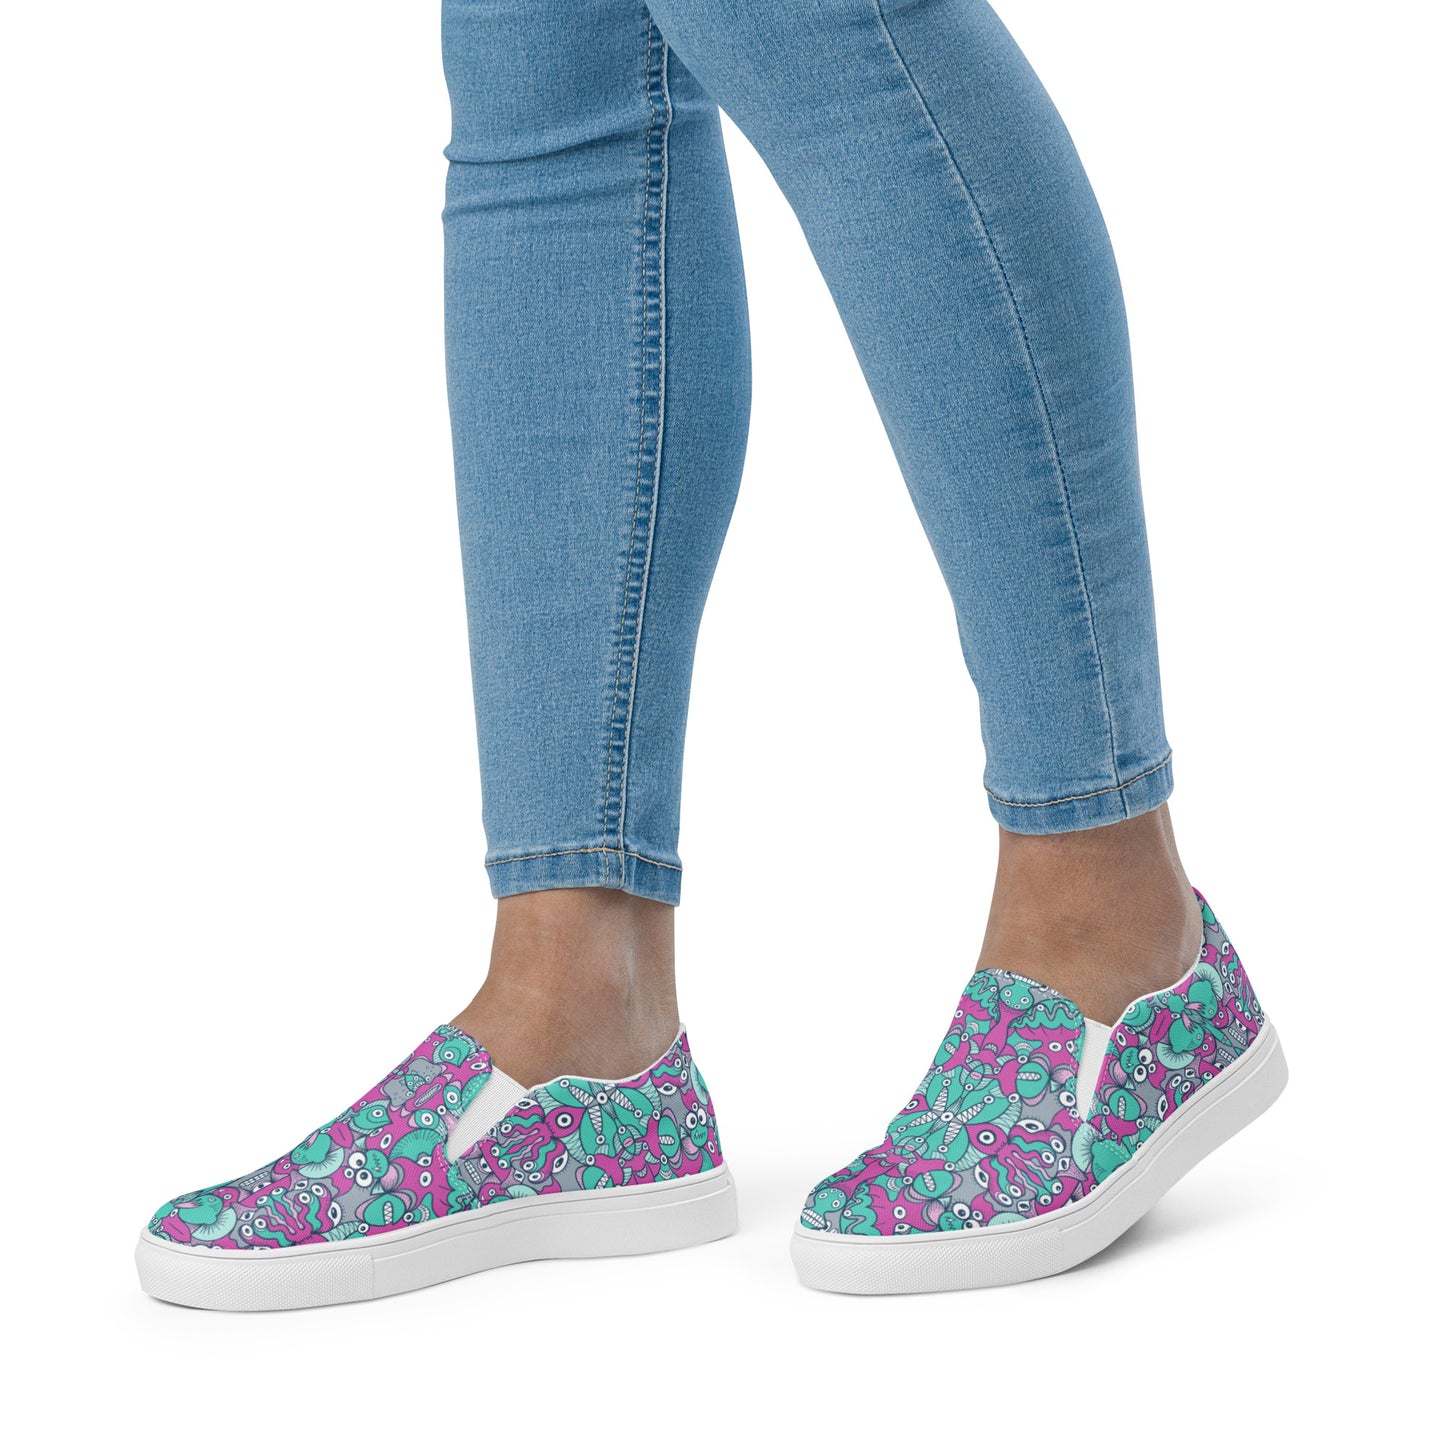 Sea creatures from an alien world Women’s slip-on canvas shoes. Lifestyle